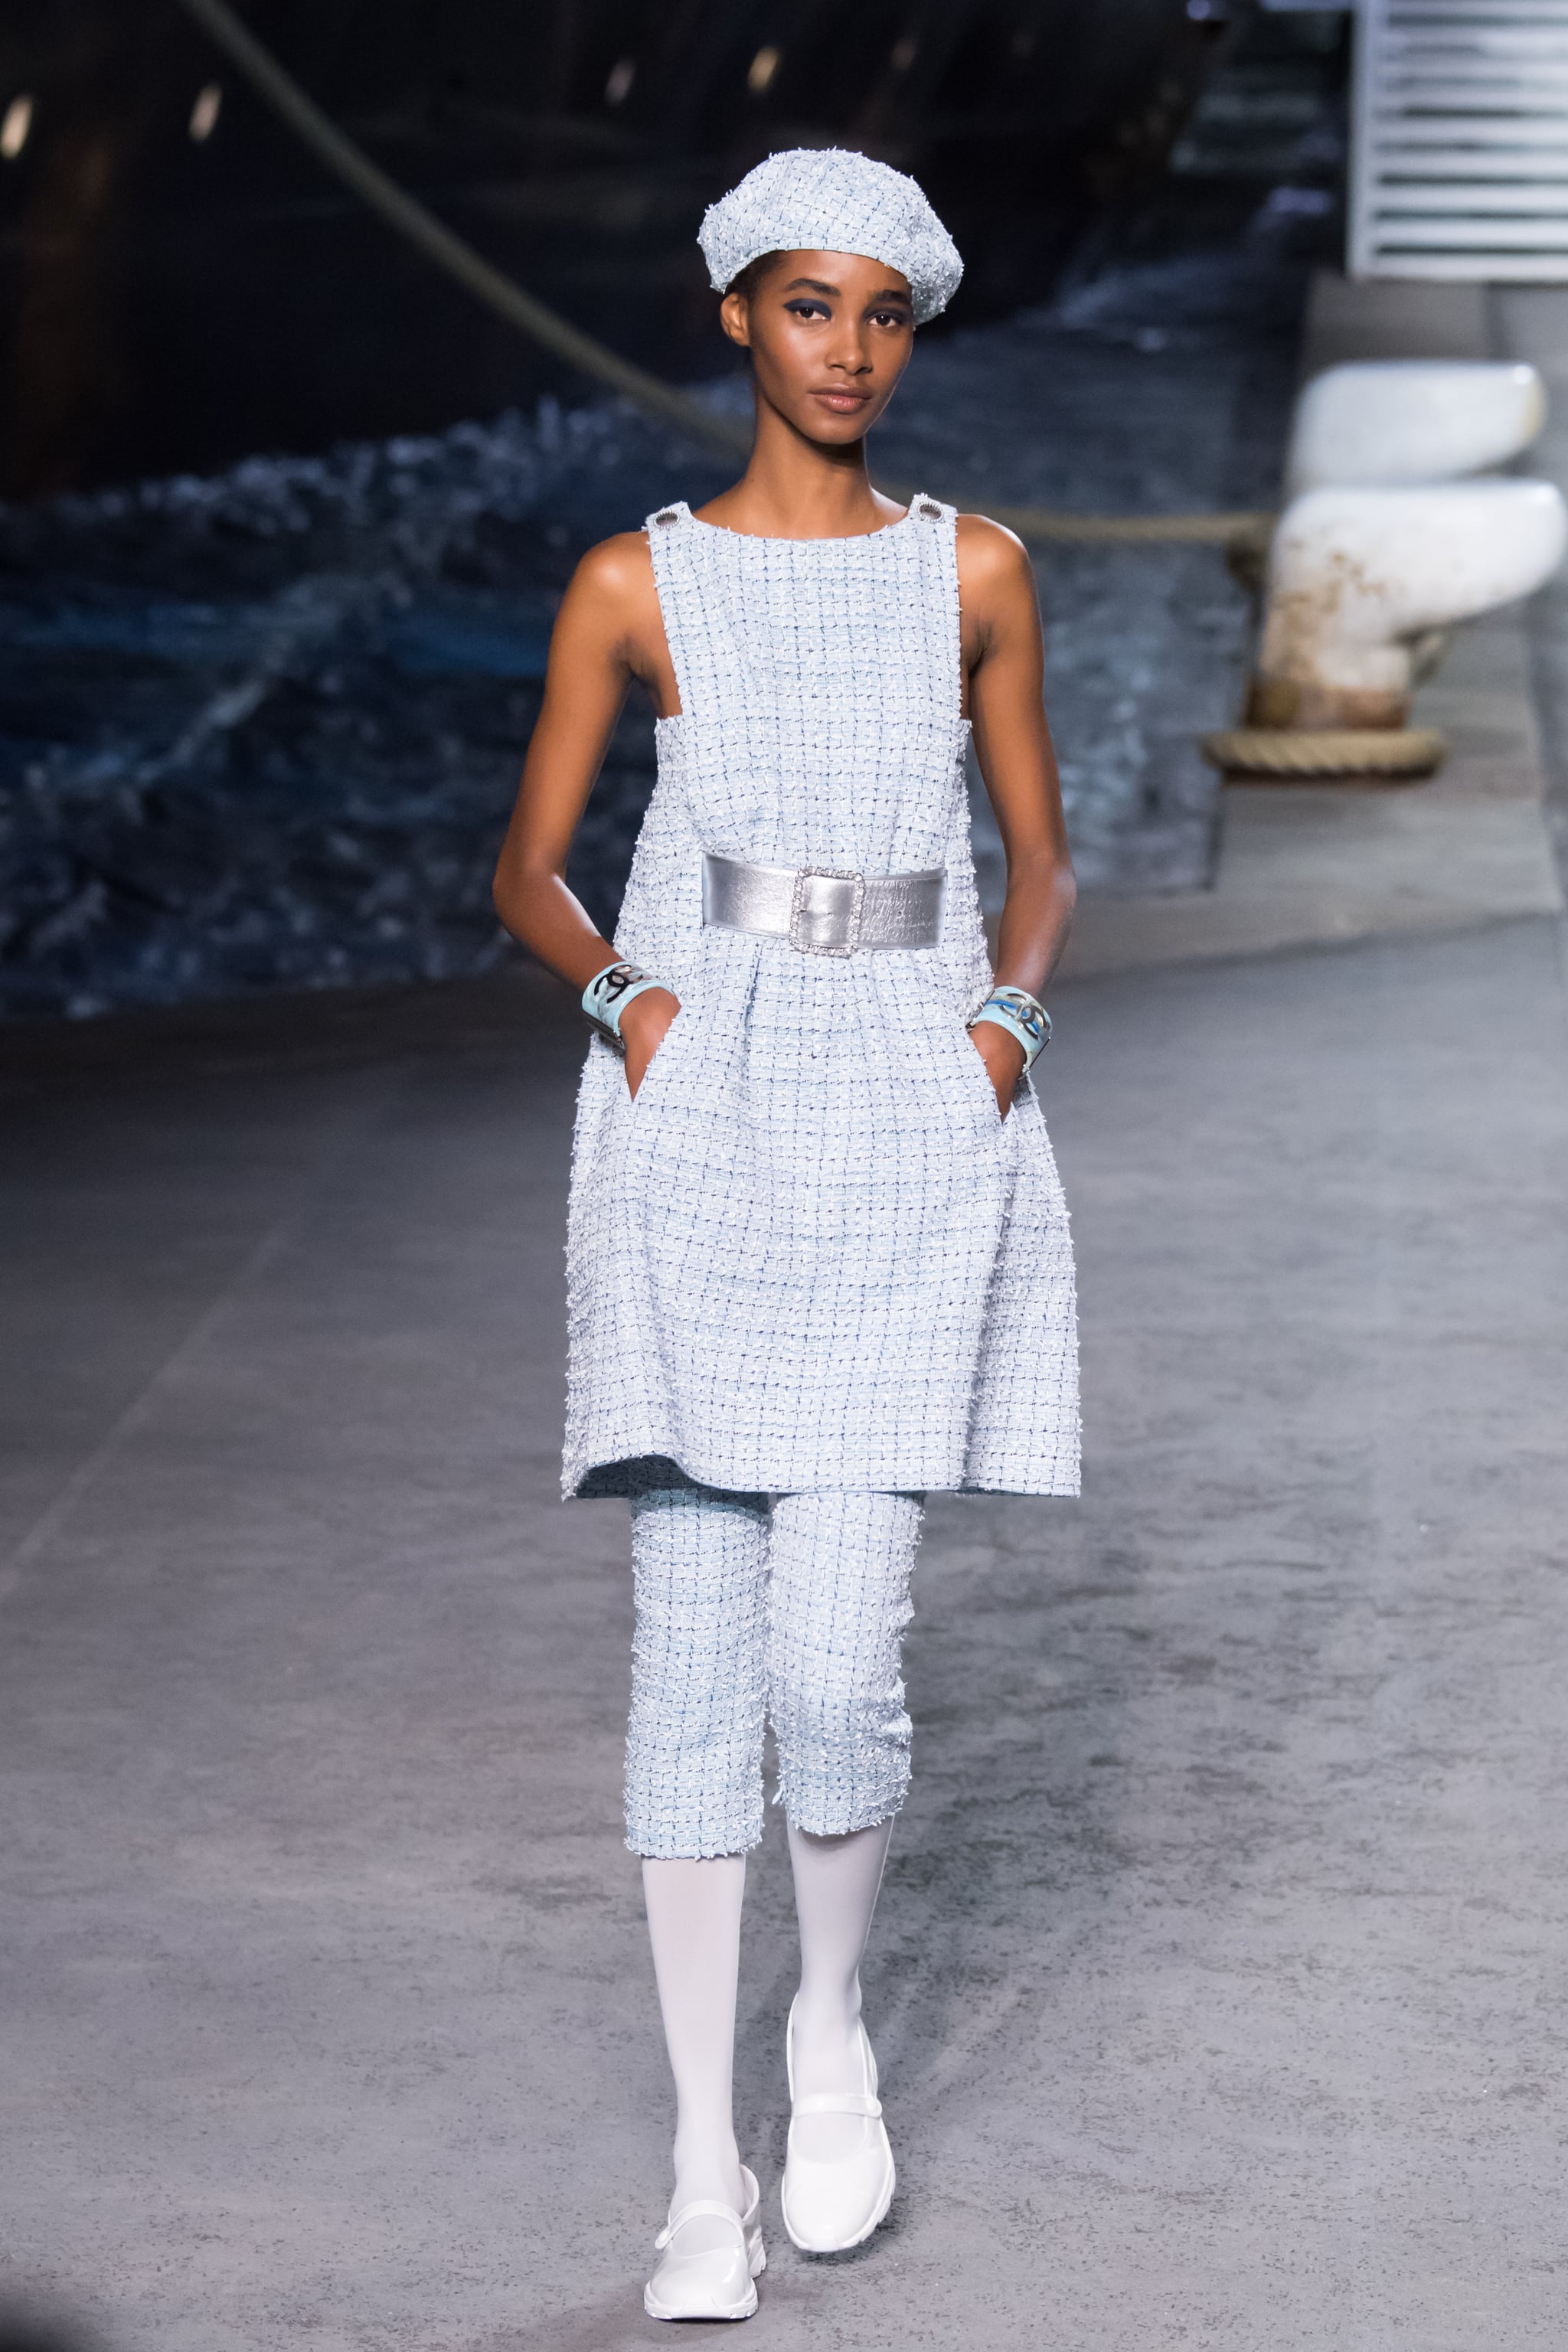 But Also Fun Ones Like This Belted Tweed Dress, Chanel's Resort Collection  Included a New Take on Tweed and a Full Blown Cruise Liner